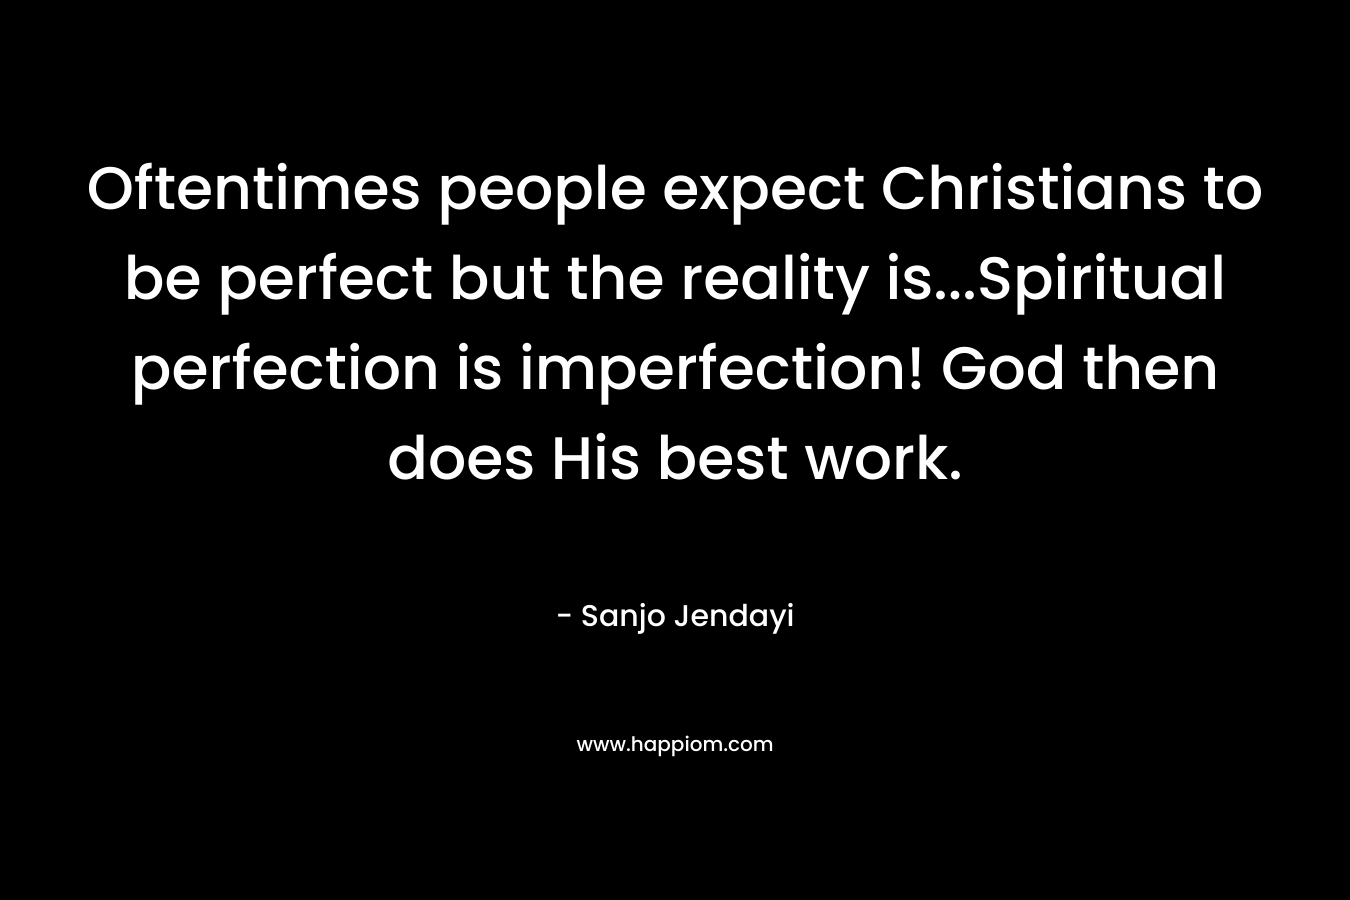 Oftentimes people expect Christians to be perfect but the reality is…Spiritual perfection is imperfection! God then does His best work. – Sanjo Jendayi